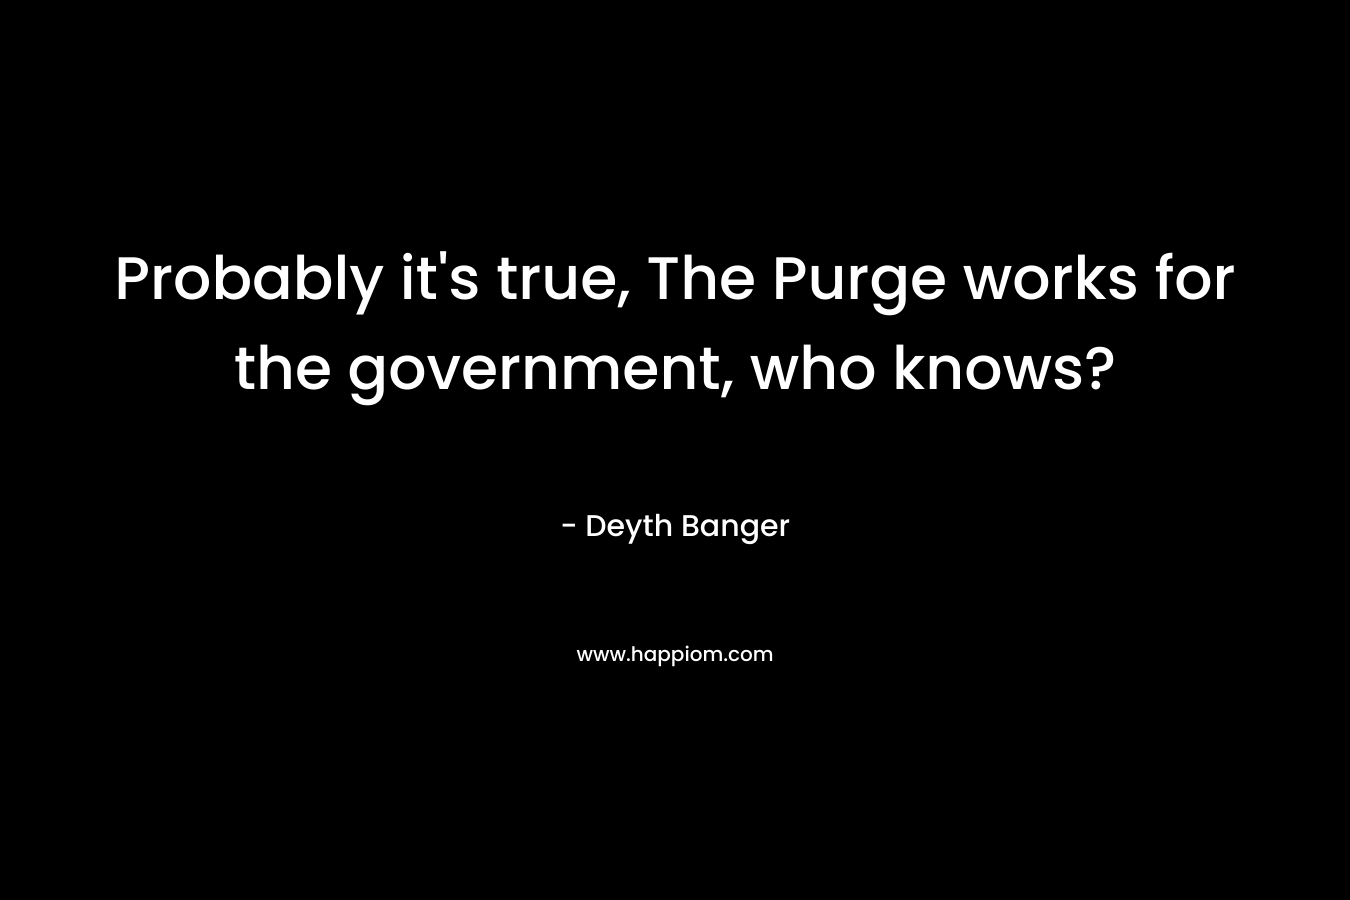 Probably it’s true, The Purge works for the government, who knows? – Deyth Banger